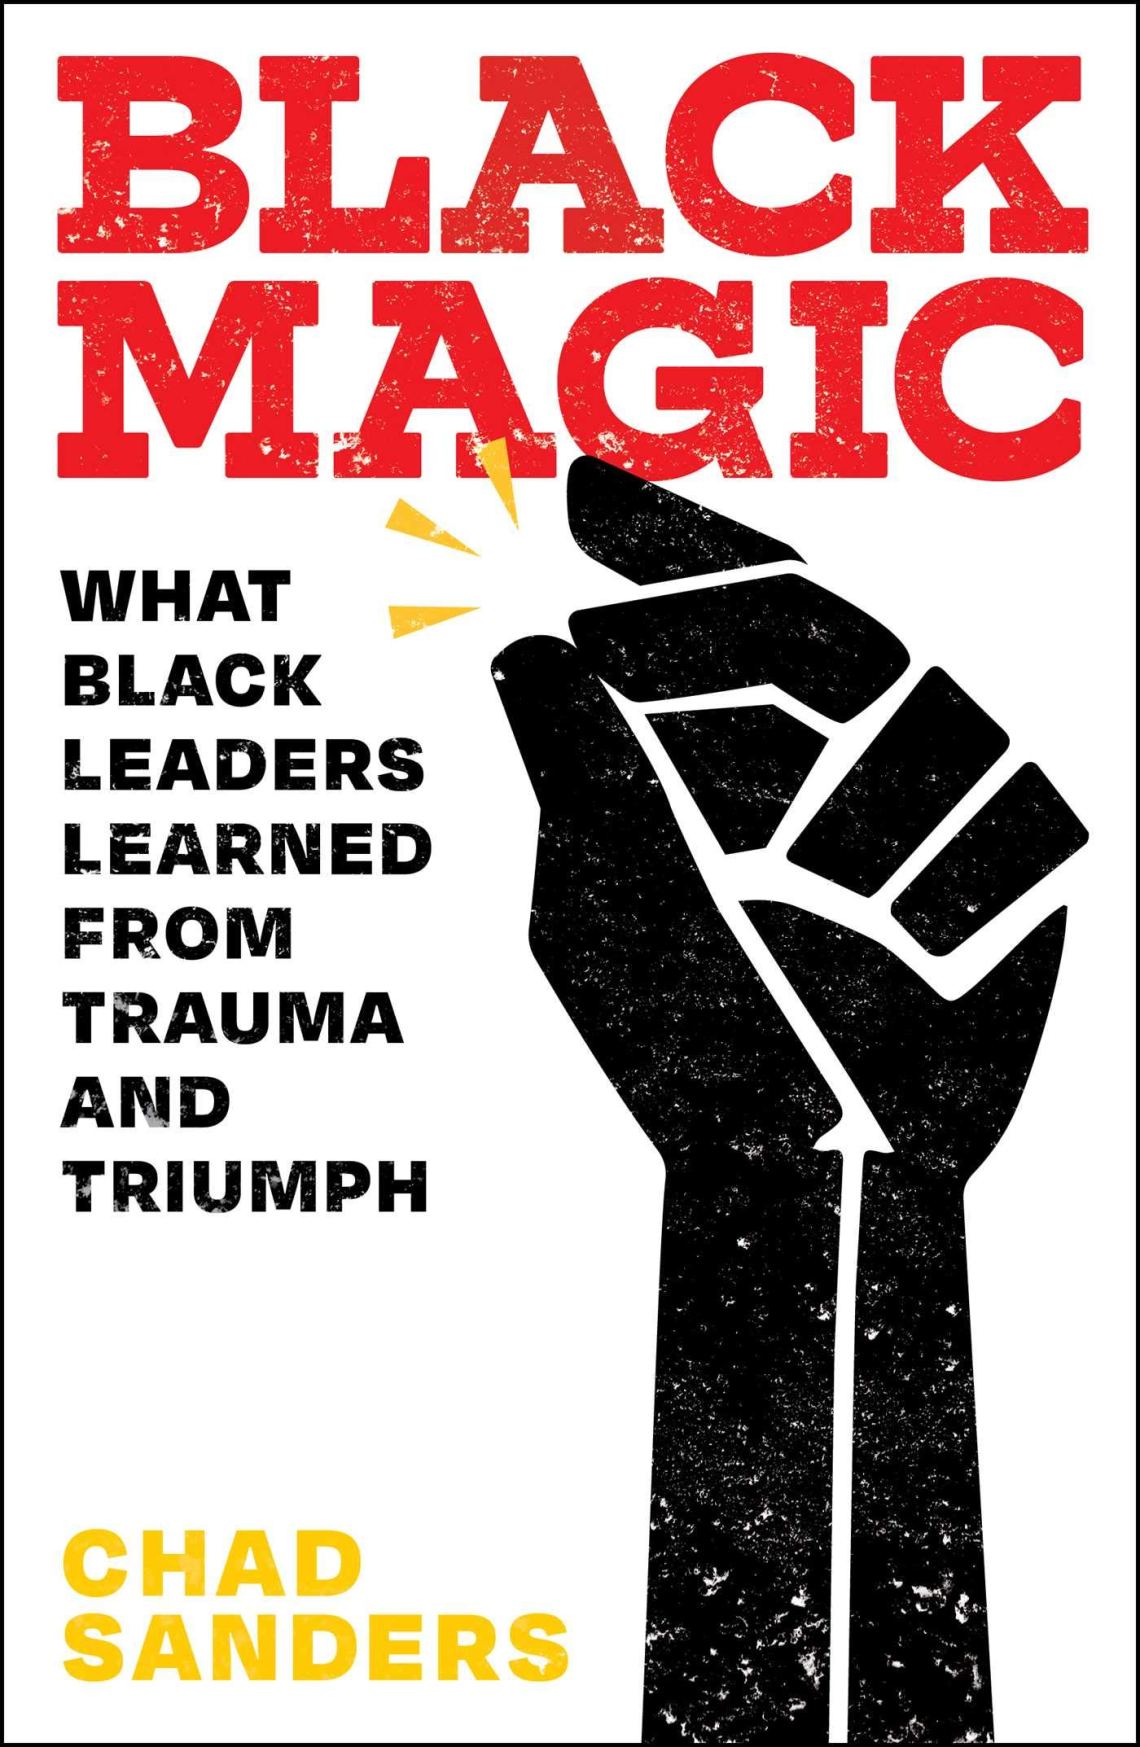 Image of book, Black Magic: What Black Leaders Learned from Trauma and Triumph
by Chad Sanders